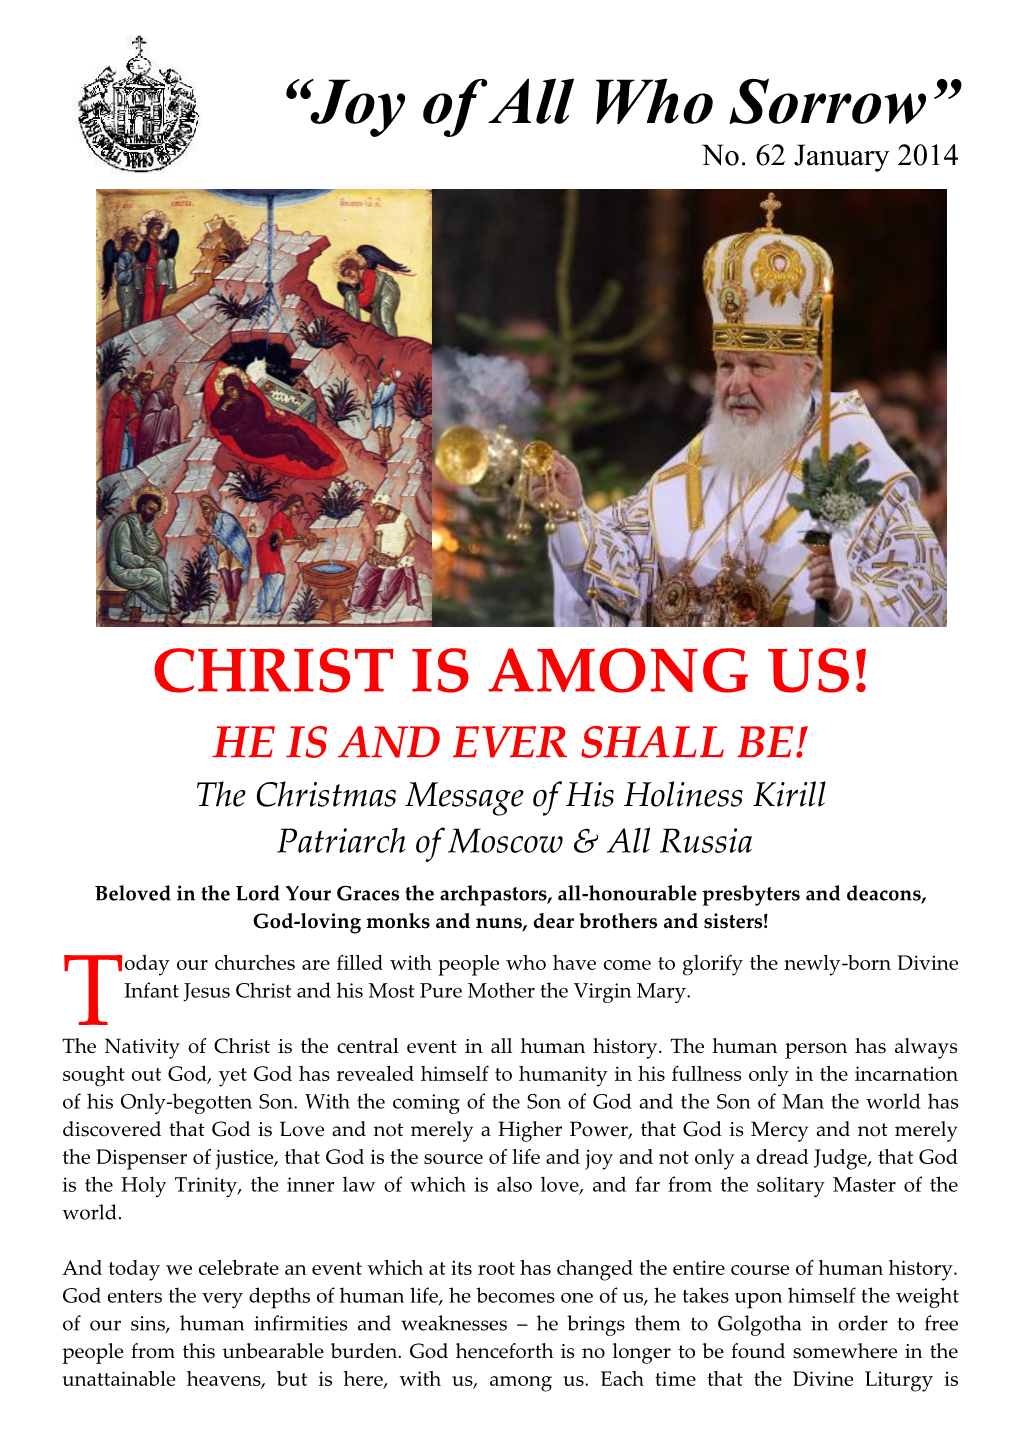 CHRIST IS AMONG US! HE IS and EVER SHALL BE! the Christmas Message of His Holiness Kirill Patriarch of Moscow & All Russia